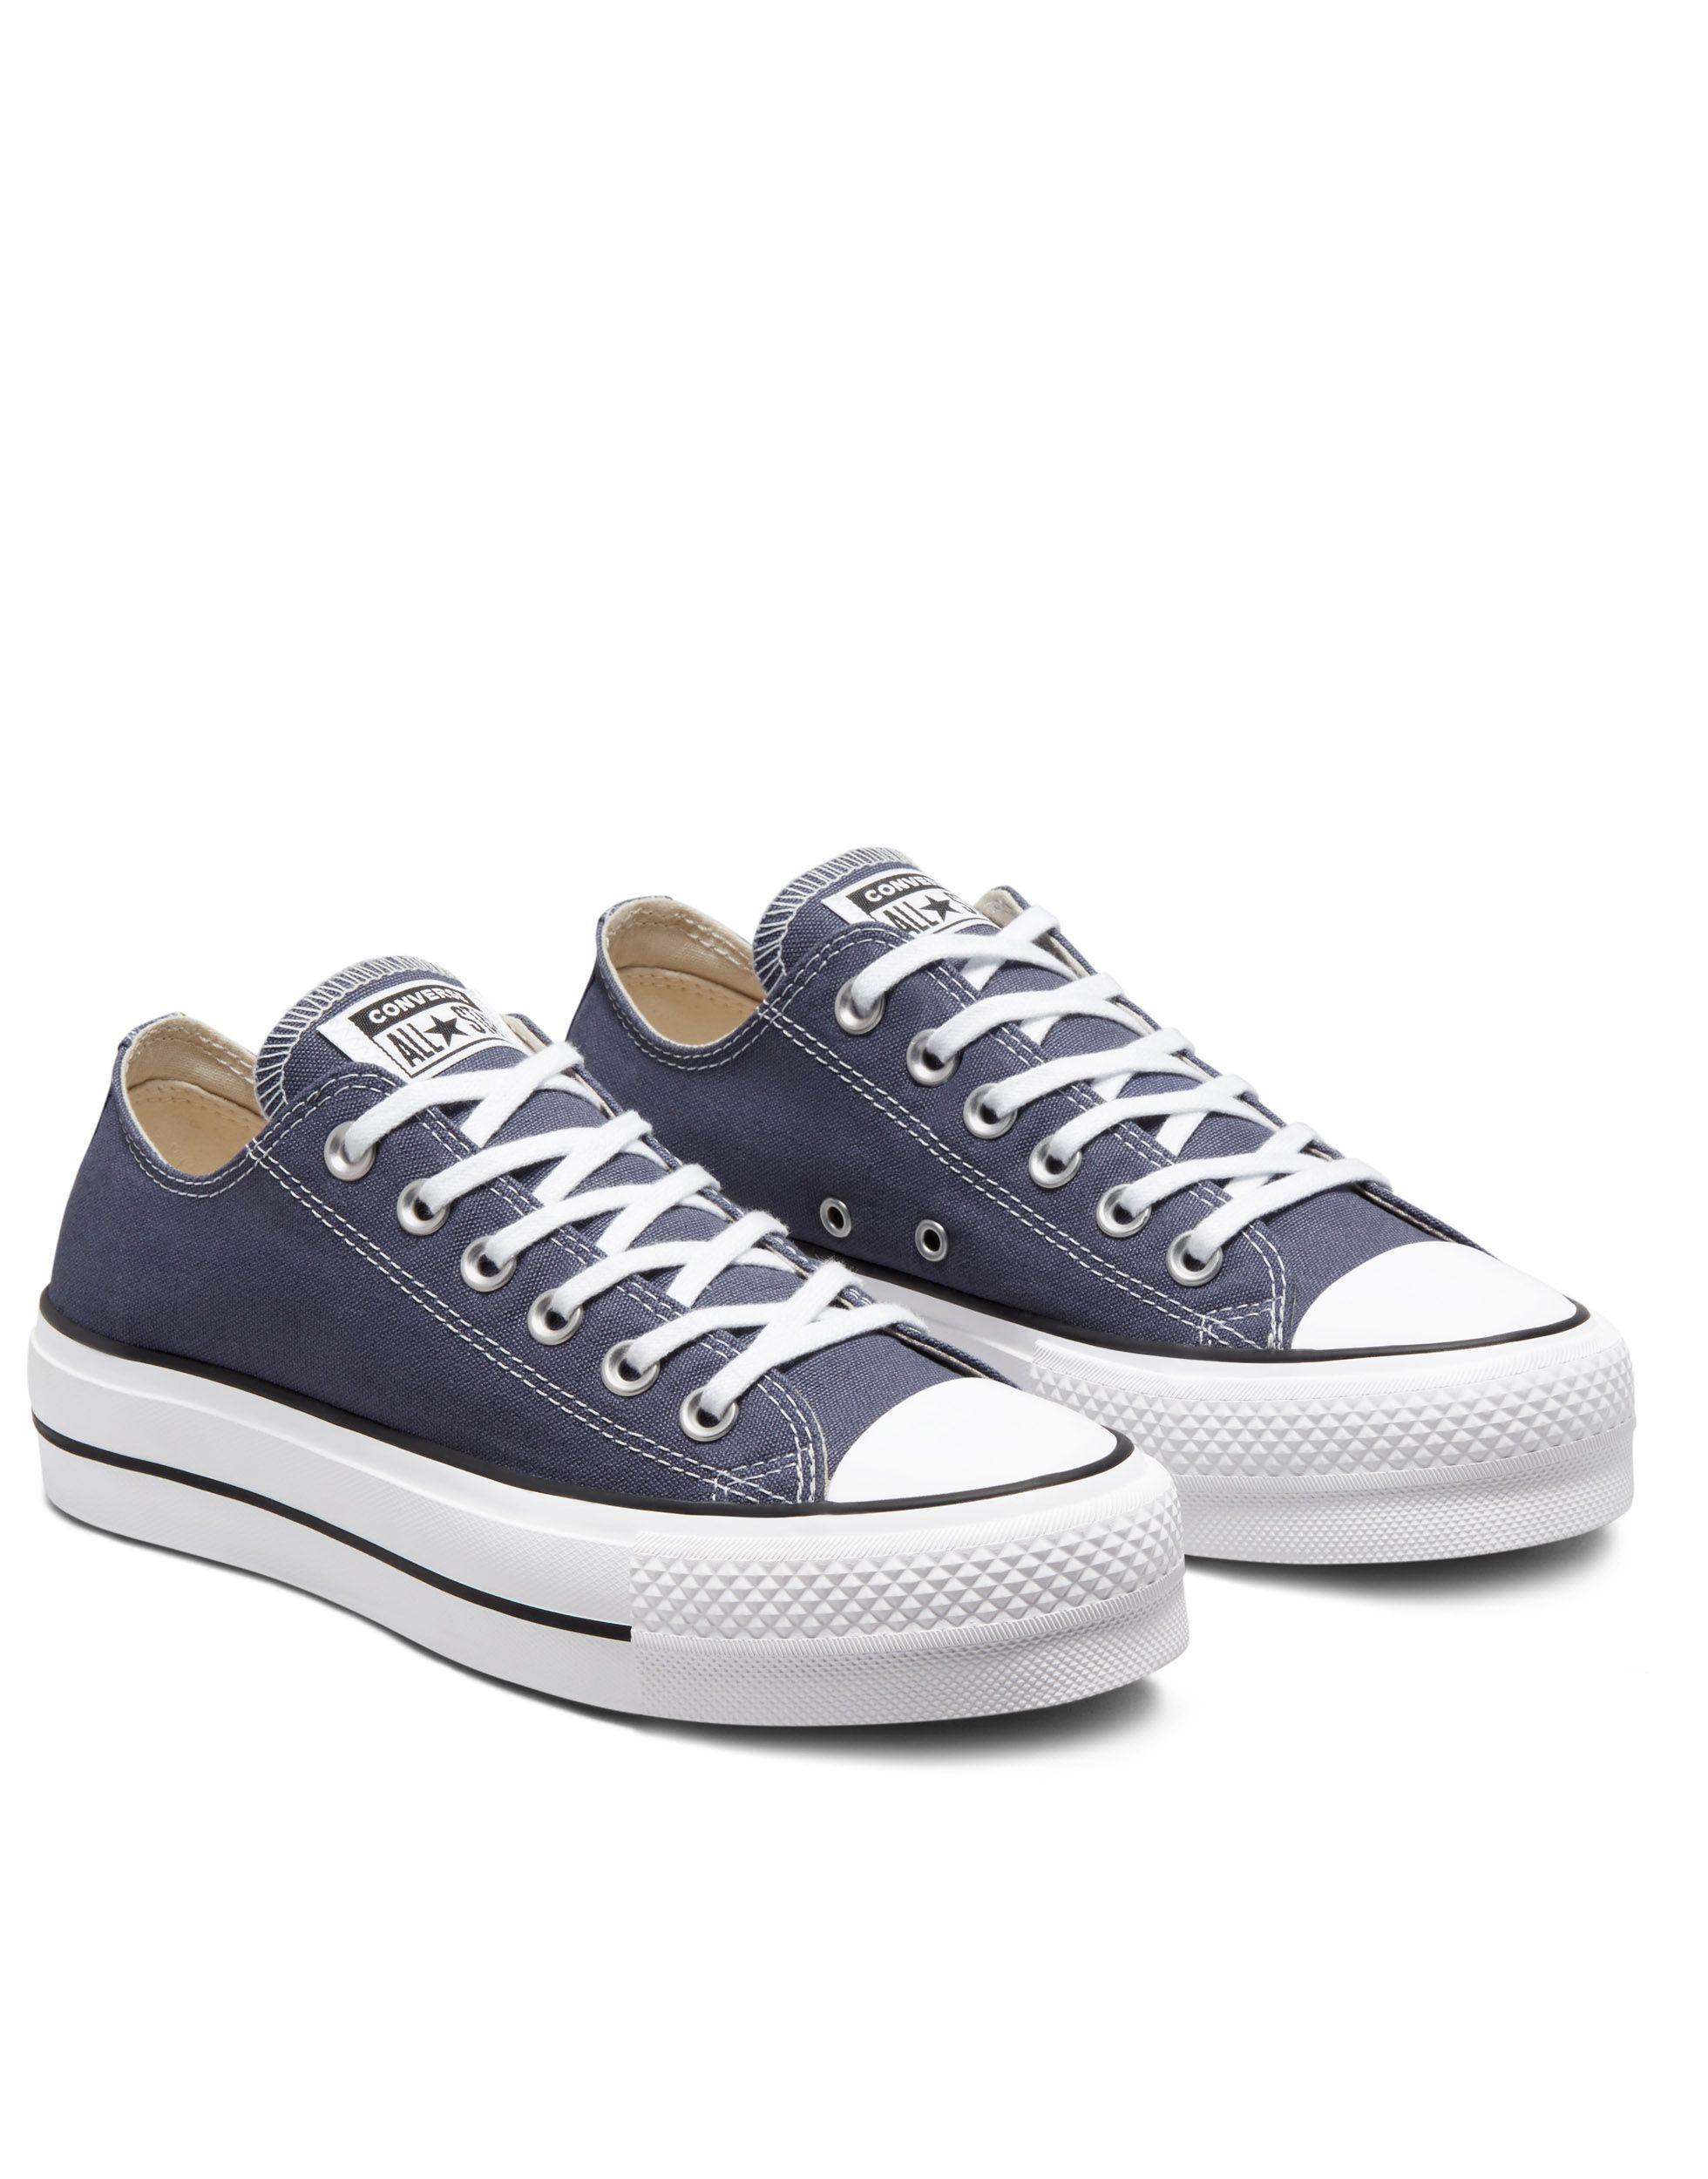 Converse Chuck Taylor All Star Ox Lift Canvas Platform Sneakers in Purple |  Lyst